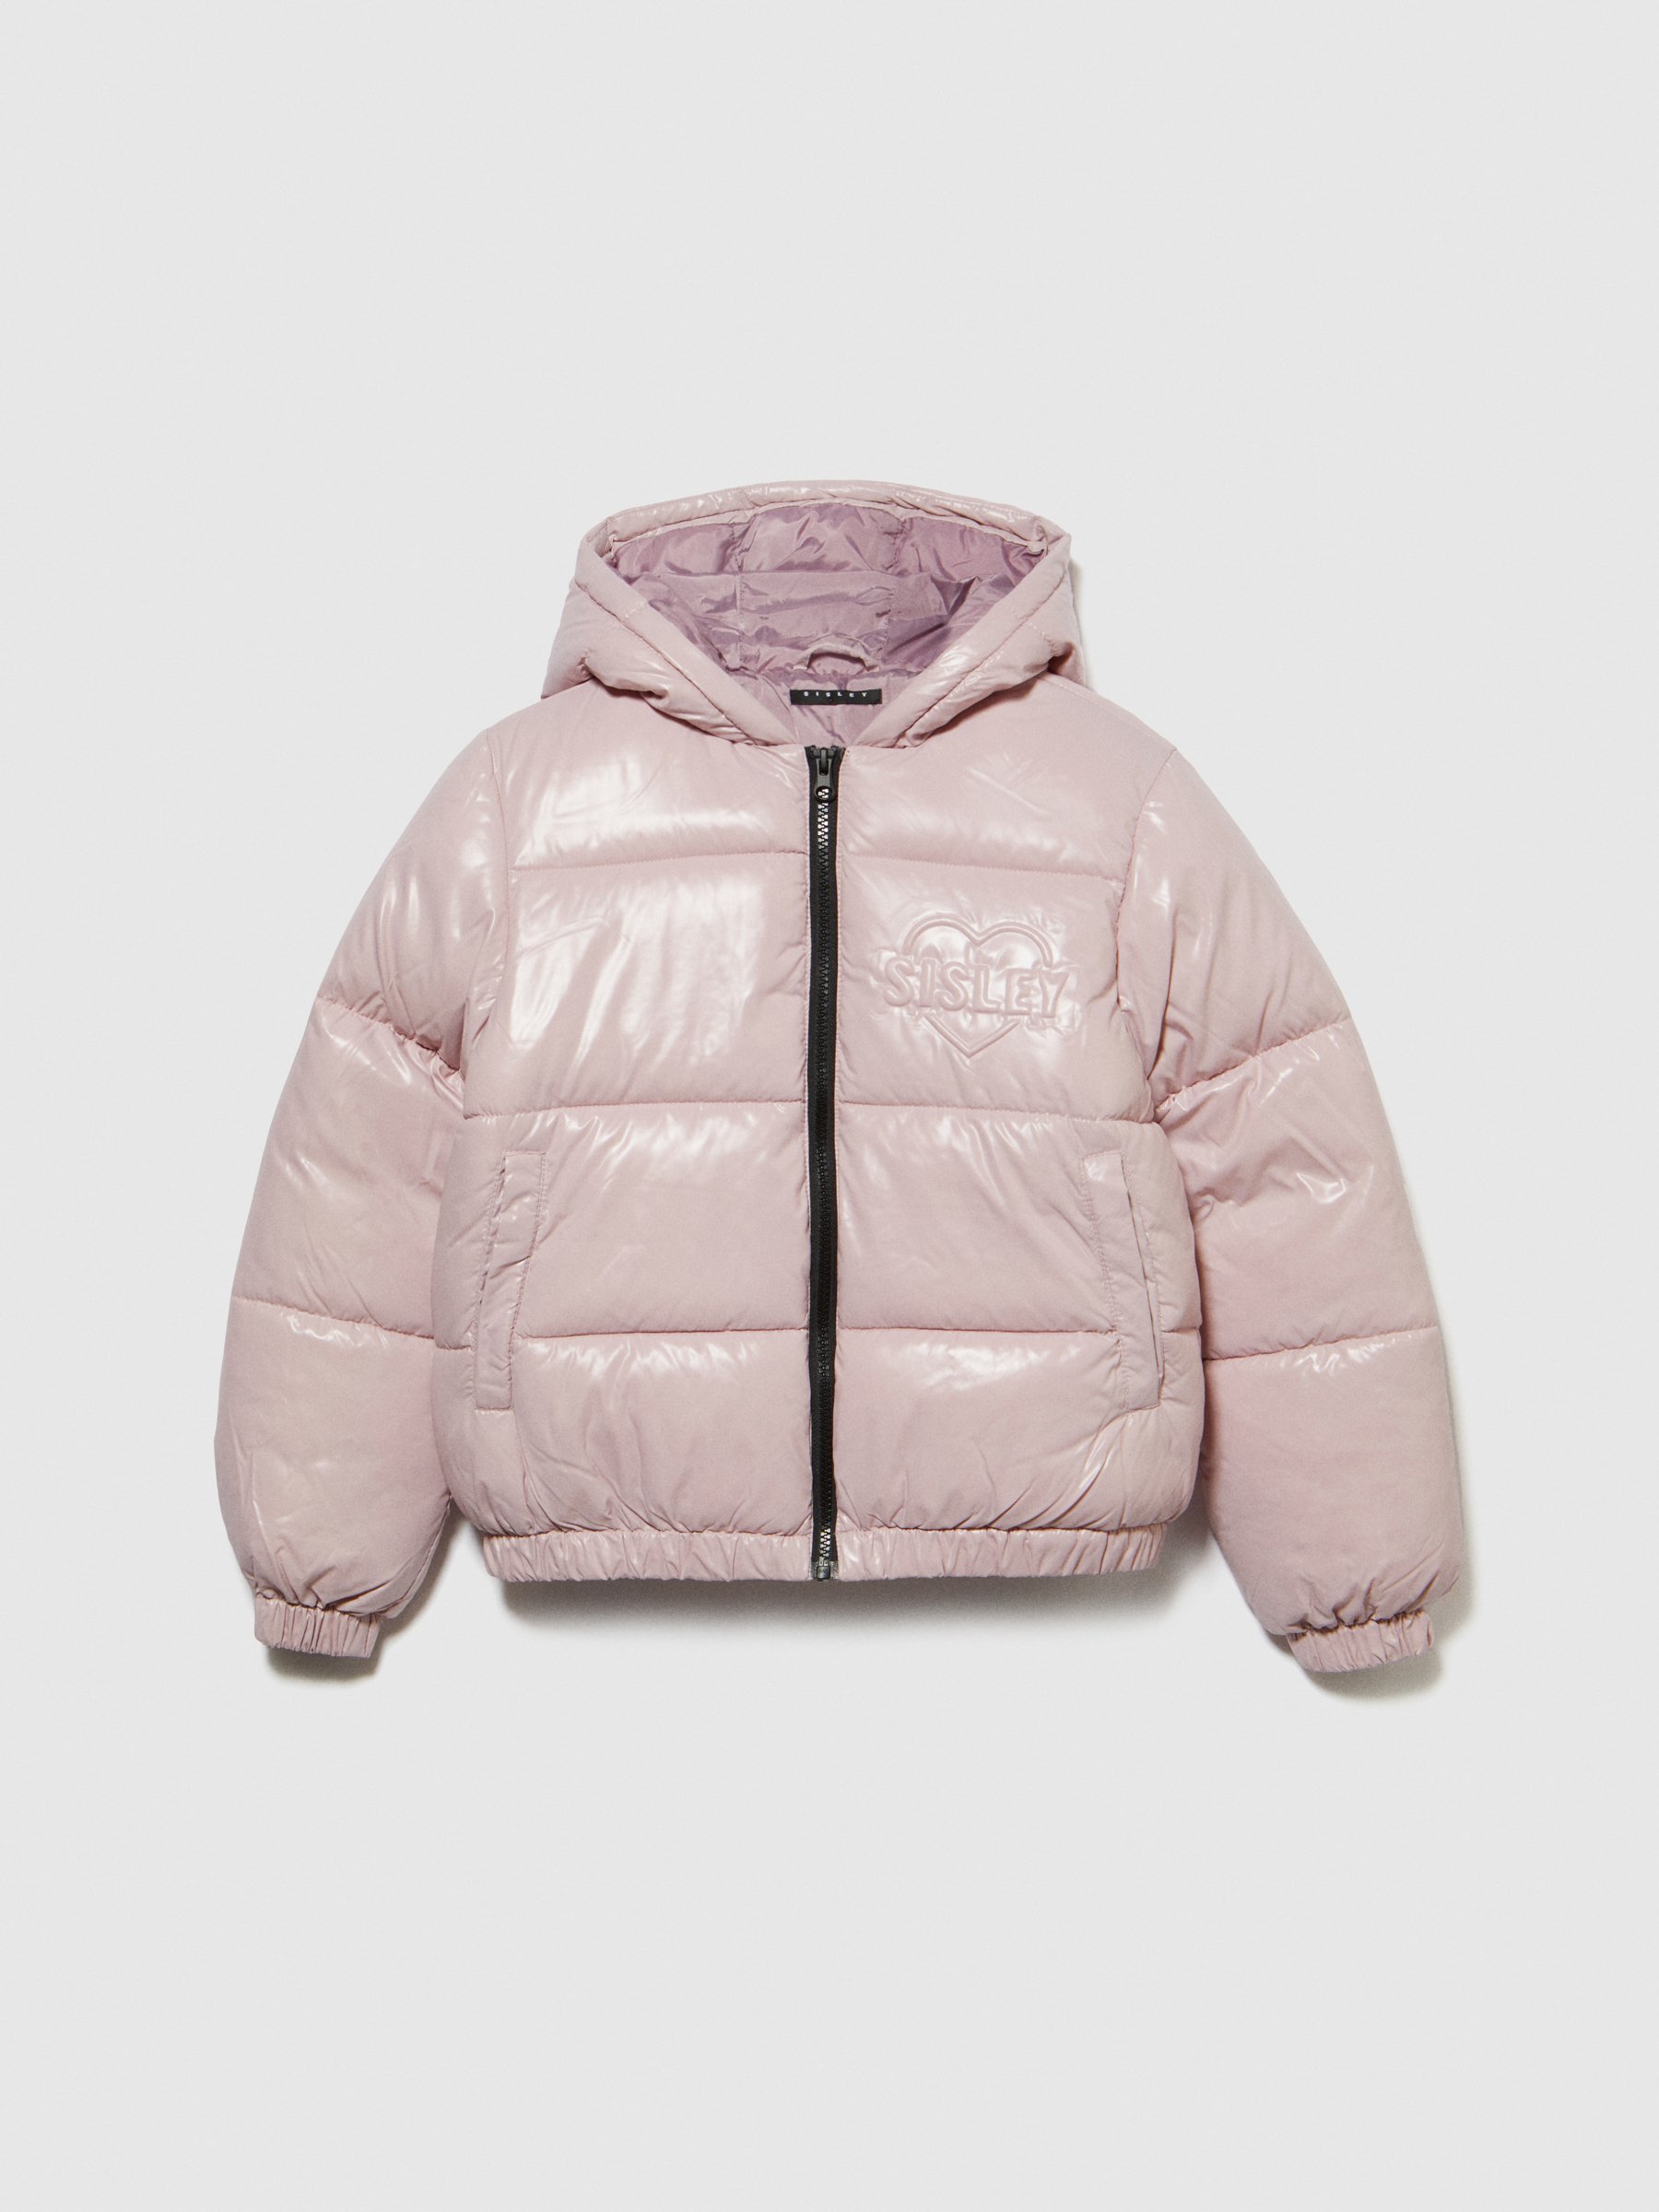 Sisley Young - Padded Jacket With Embossed Print, Woman, Pastel Pink, Size: M